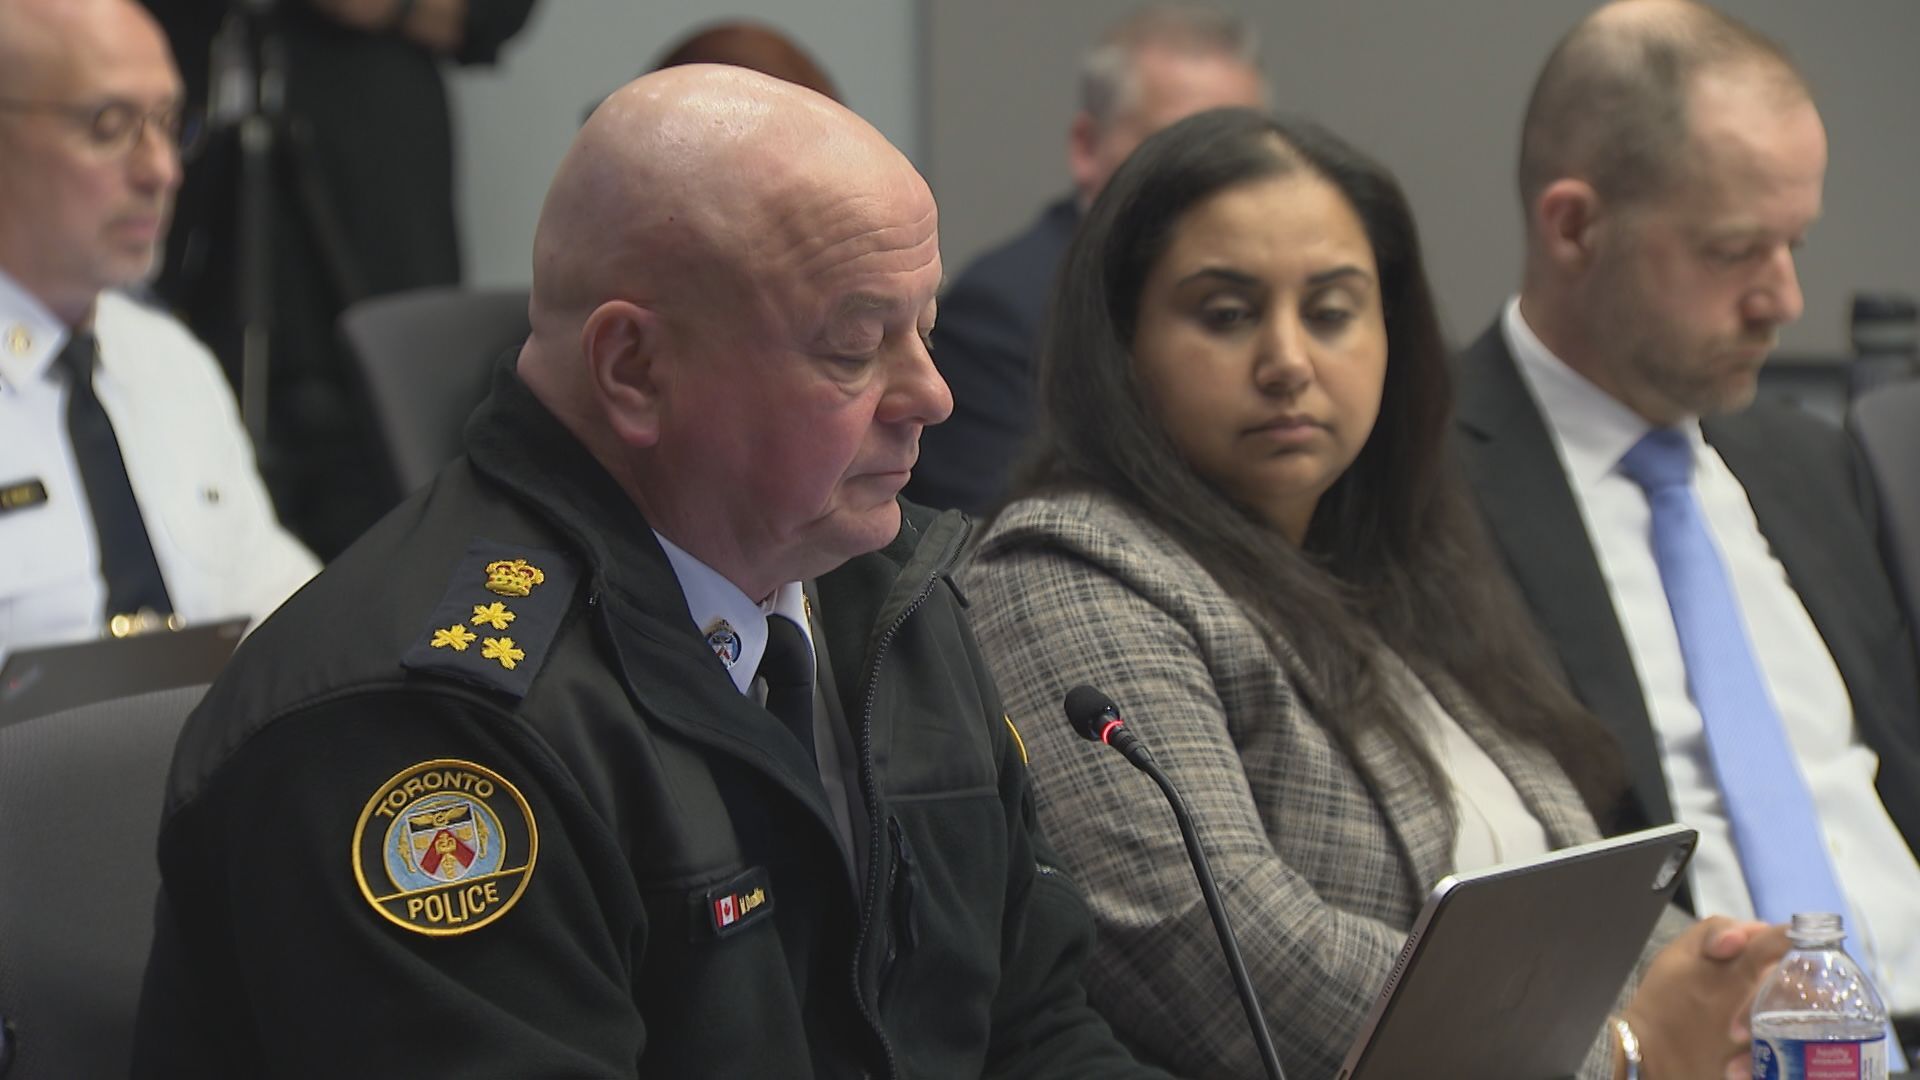 Toronto's police chief apologizes for casting doubt on Umar Zameer's innocence